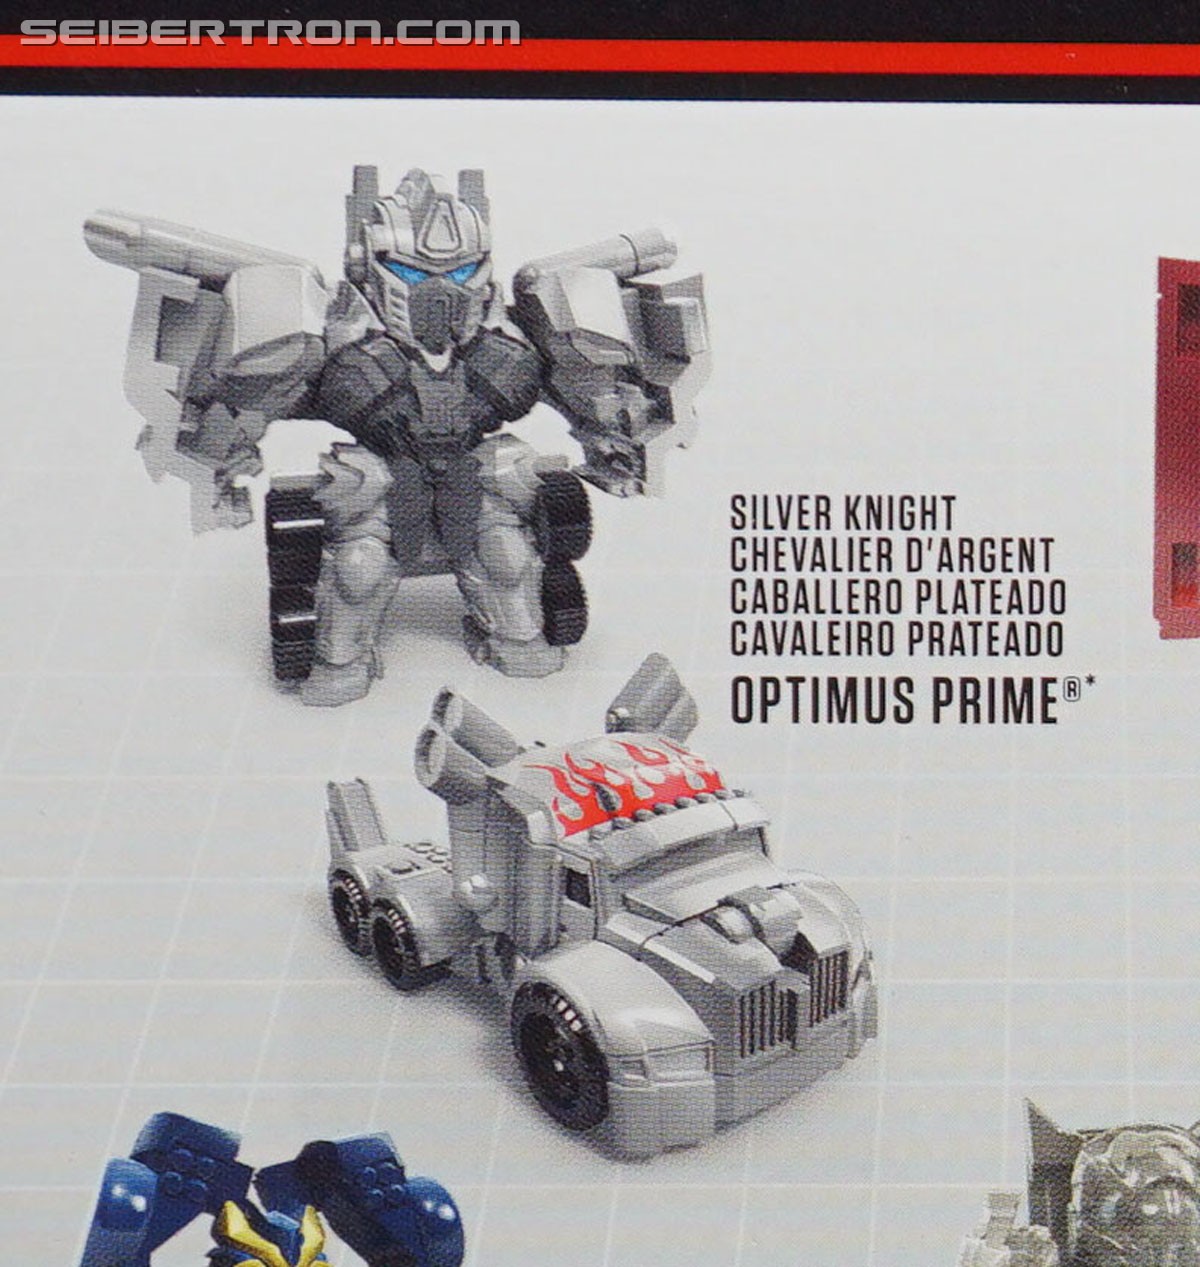 Transformers News: Transformers Tiny Titans Series 3 Robot Mode Images